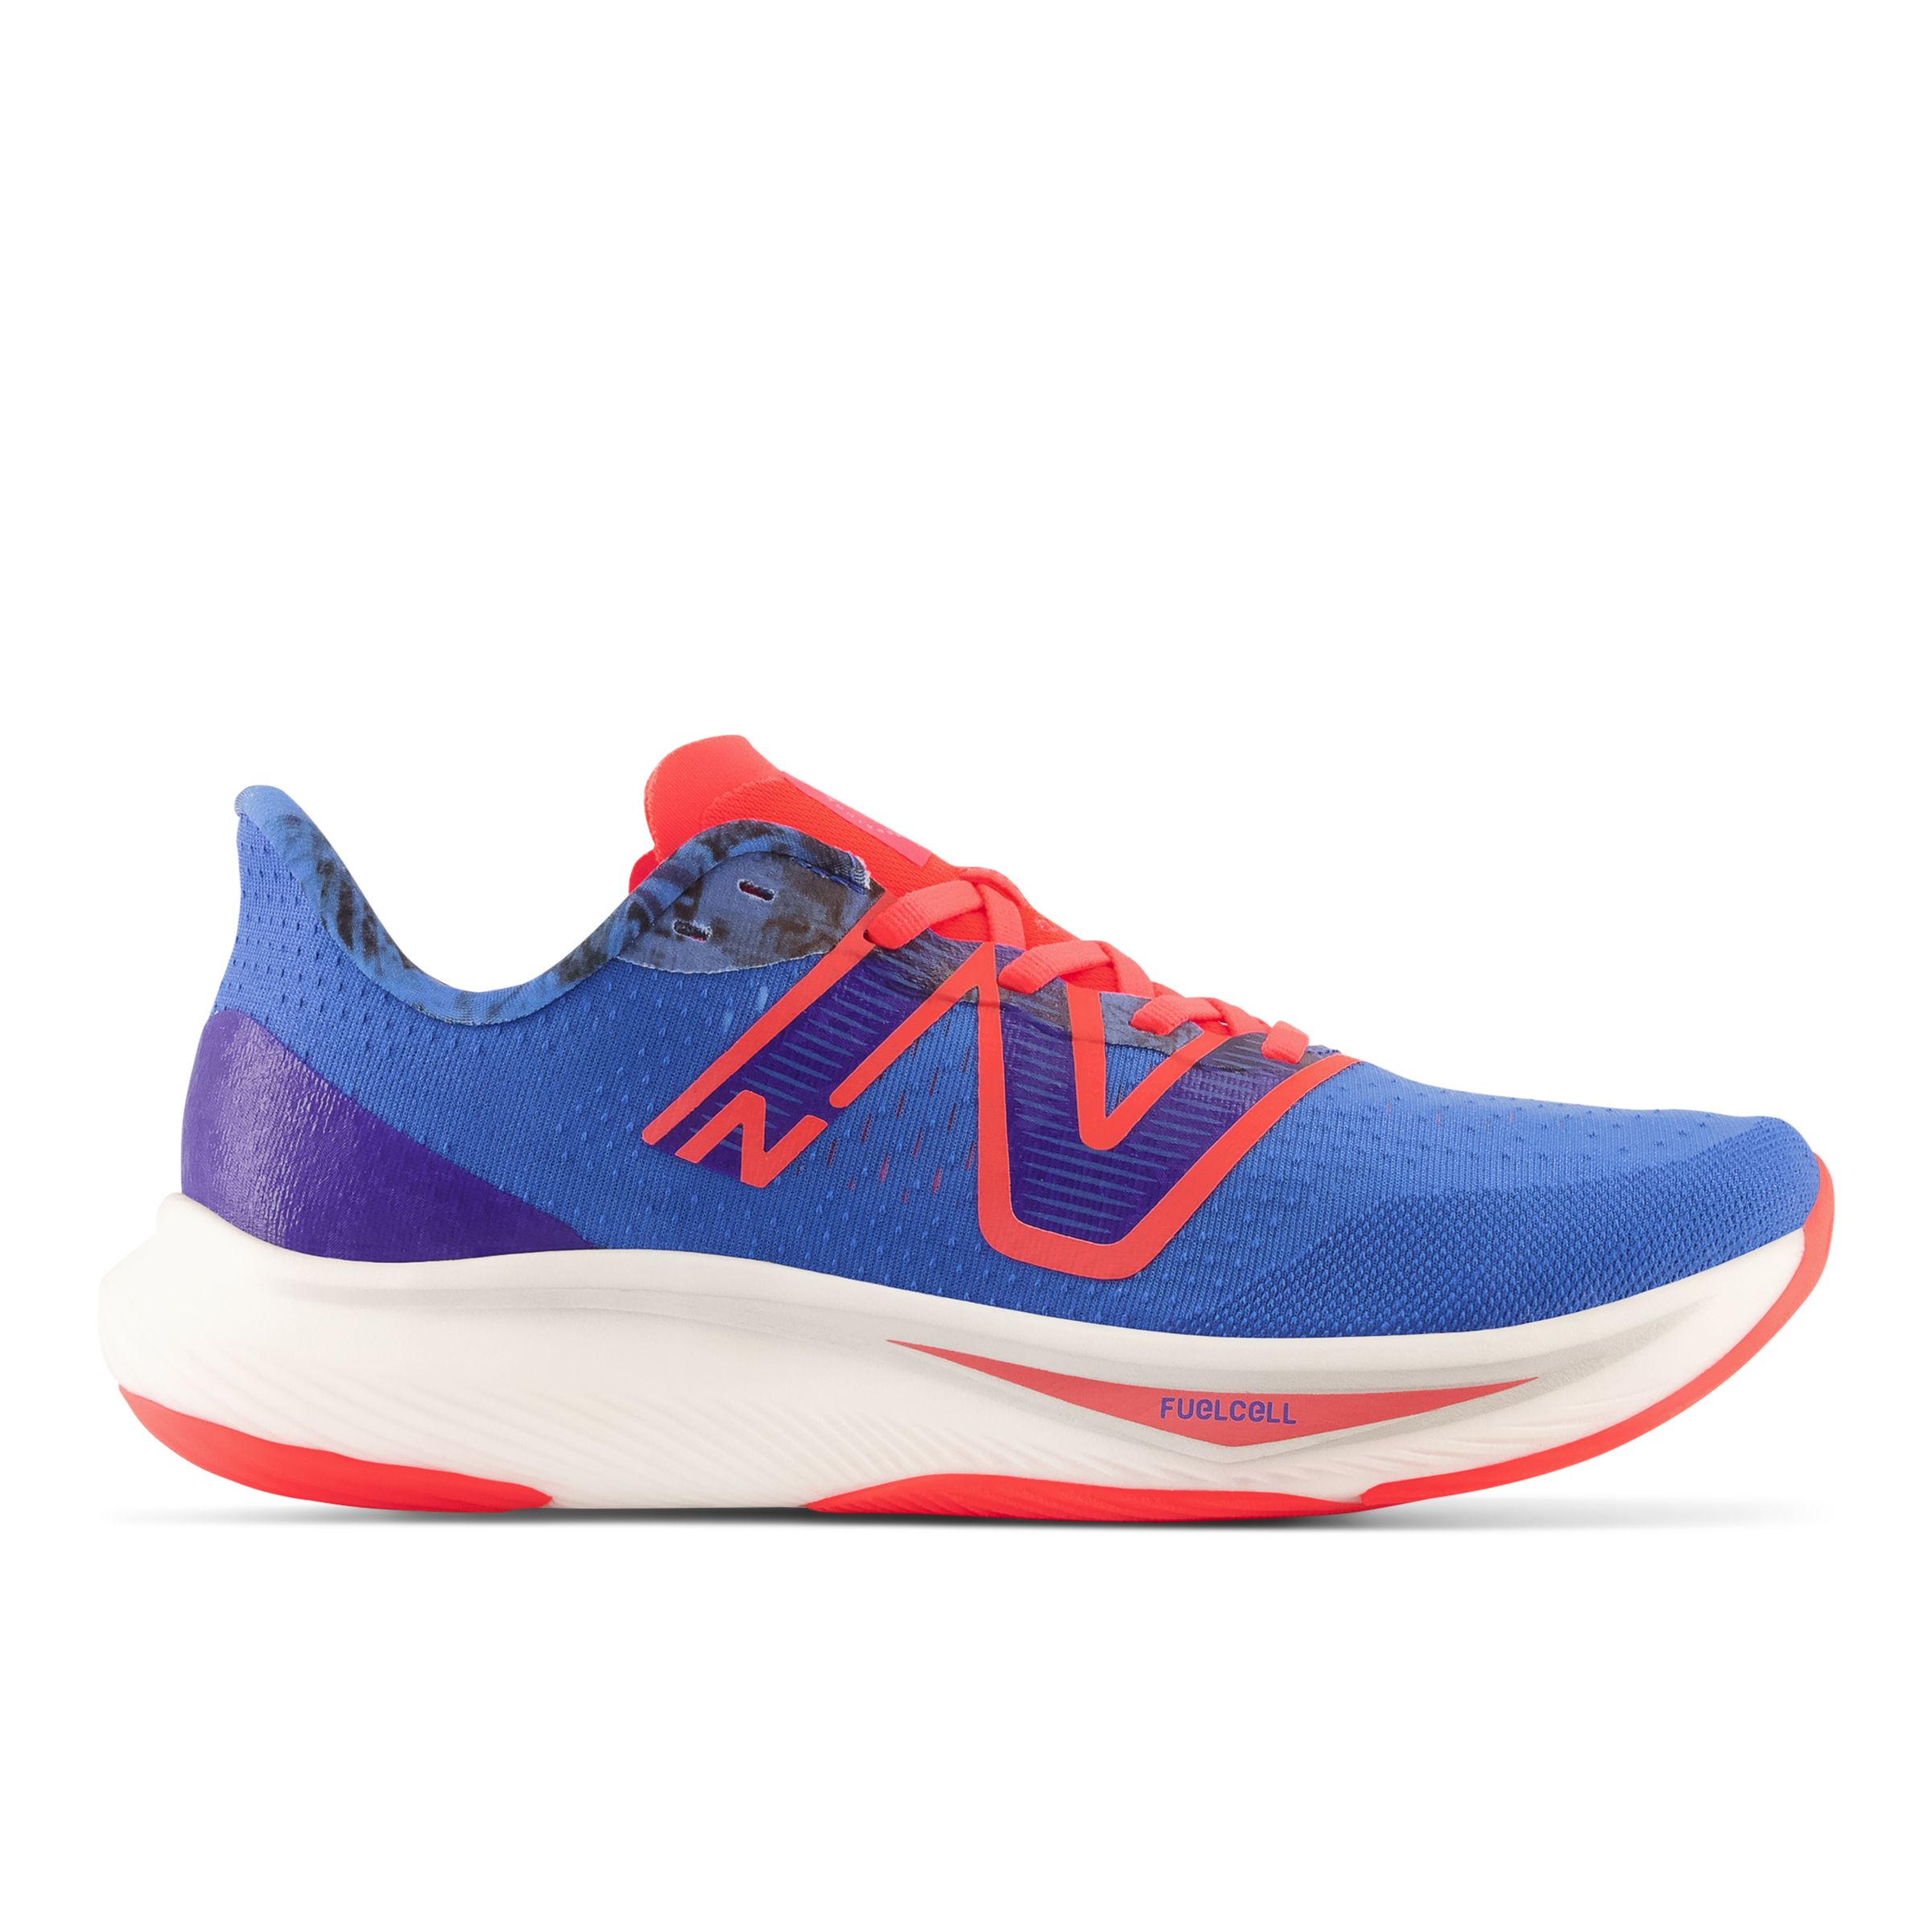 NB FuelCell Rebel v3, , swatch